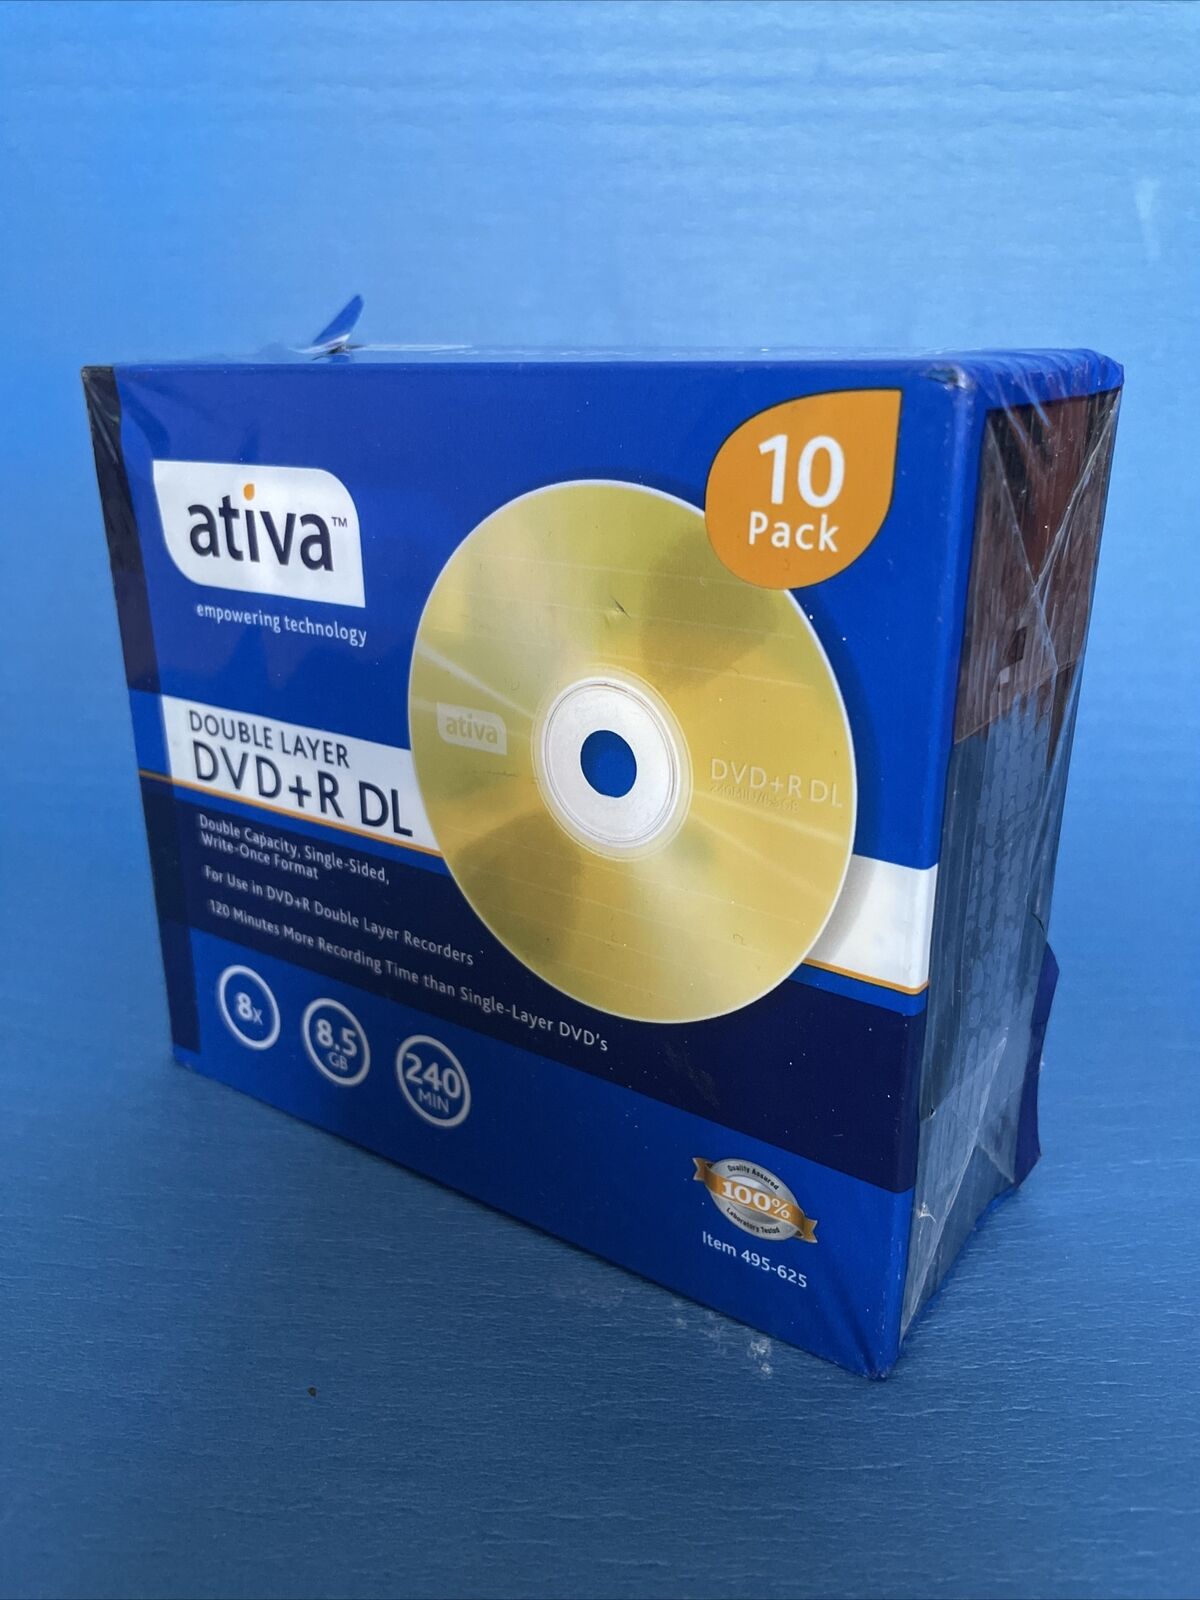 Ativa Double Layer DVD+R DL 10 Pack Double Capacity, Single Sided 240 Minutes